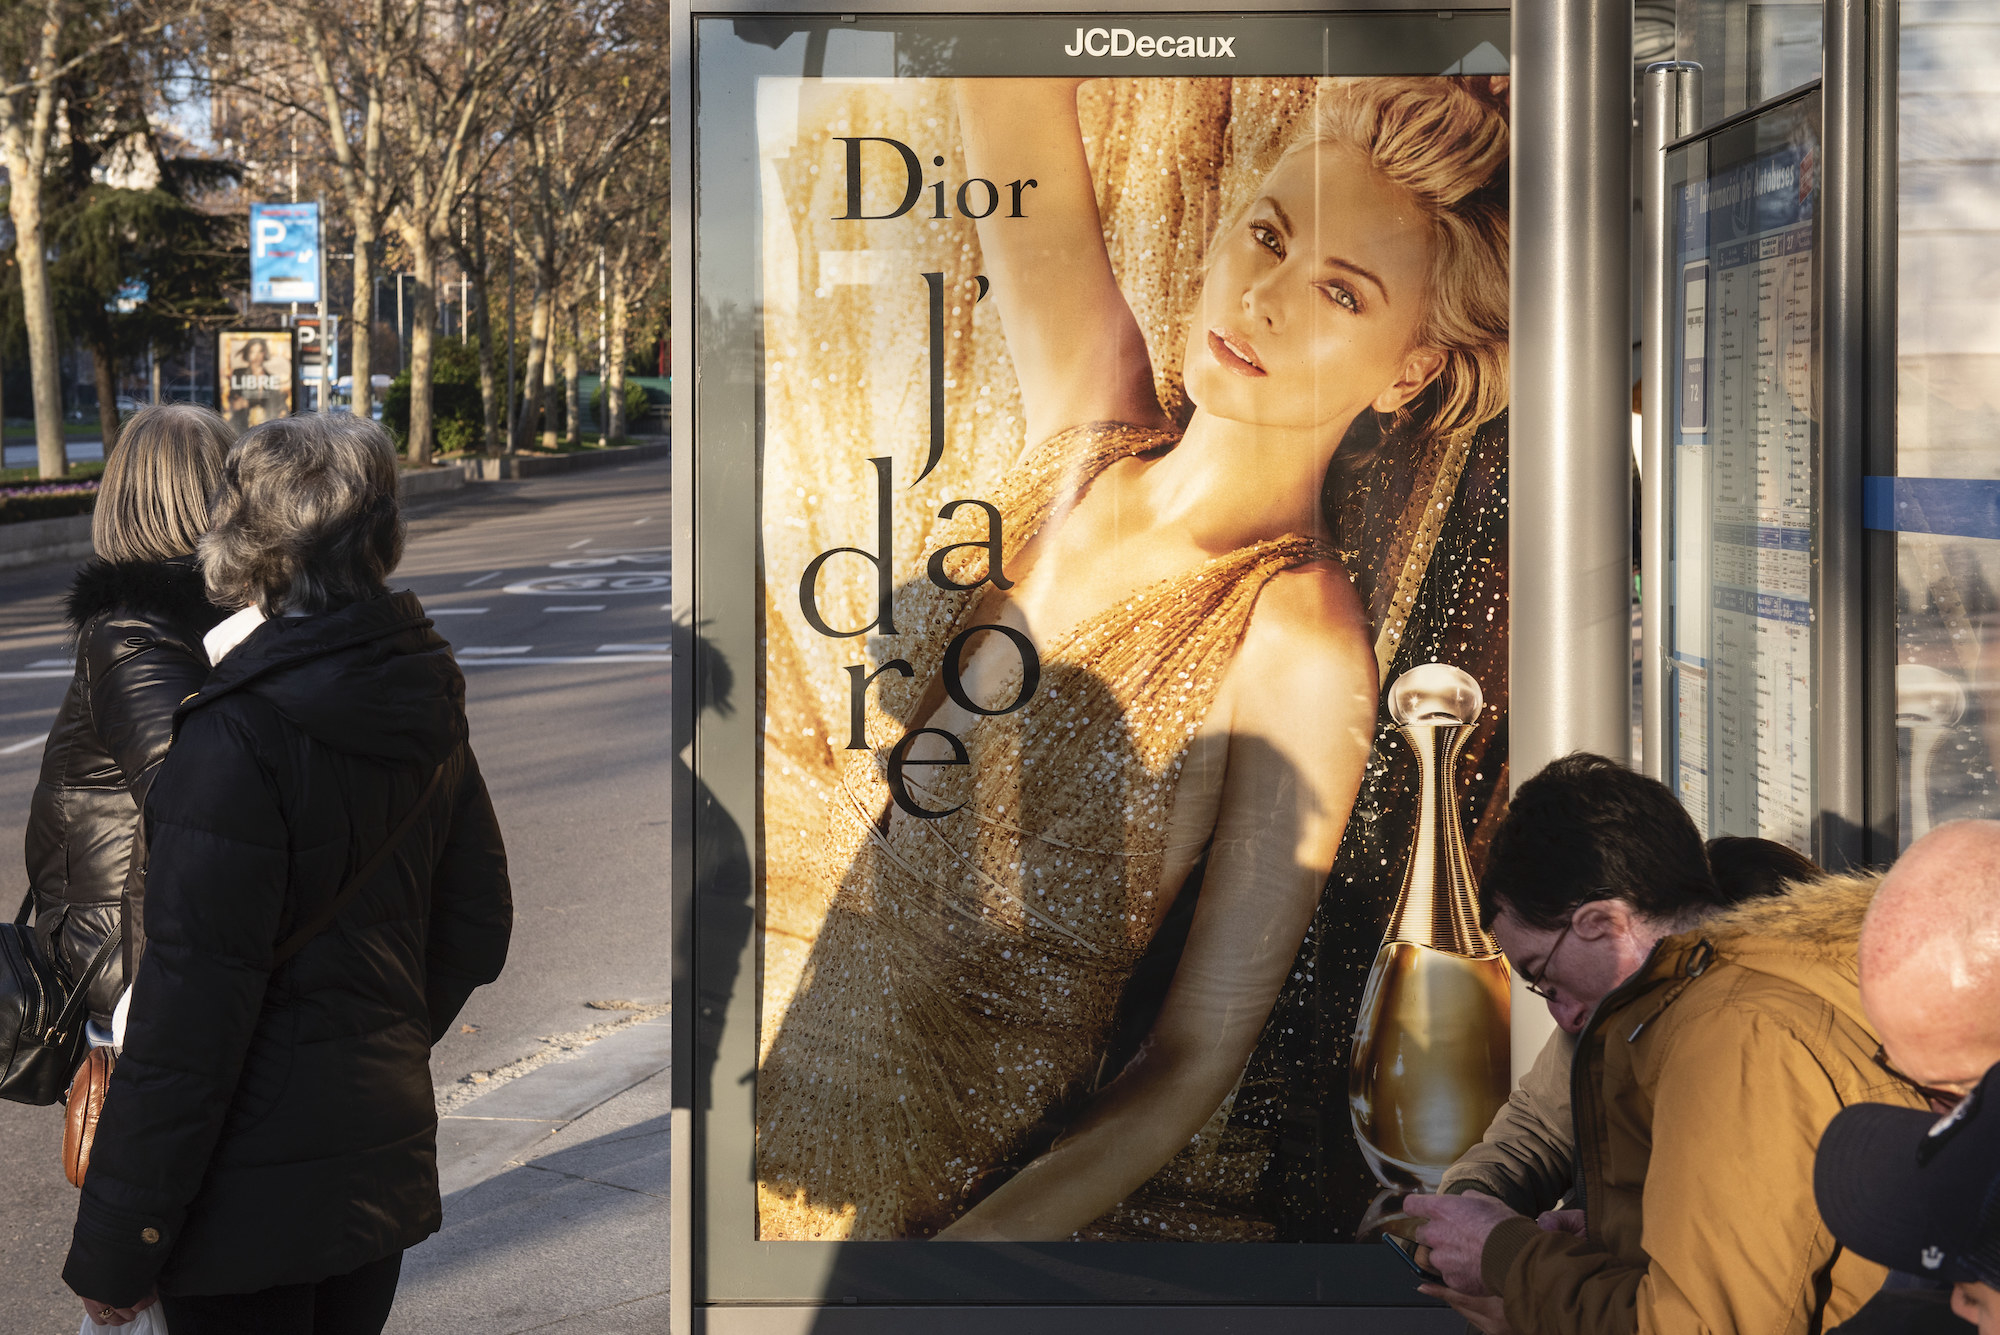 LVMH perfume makers Dior, Givenchy will produce free hand sanitizer